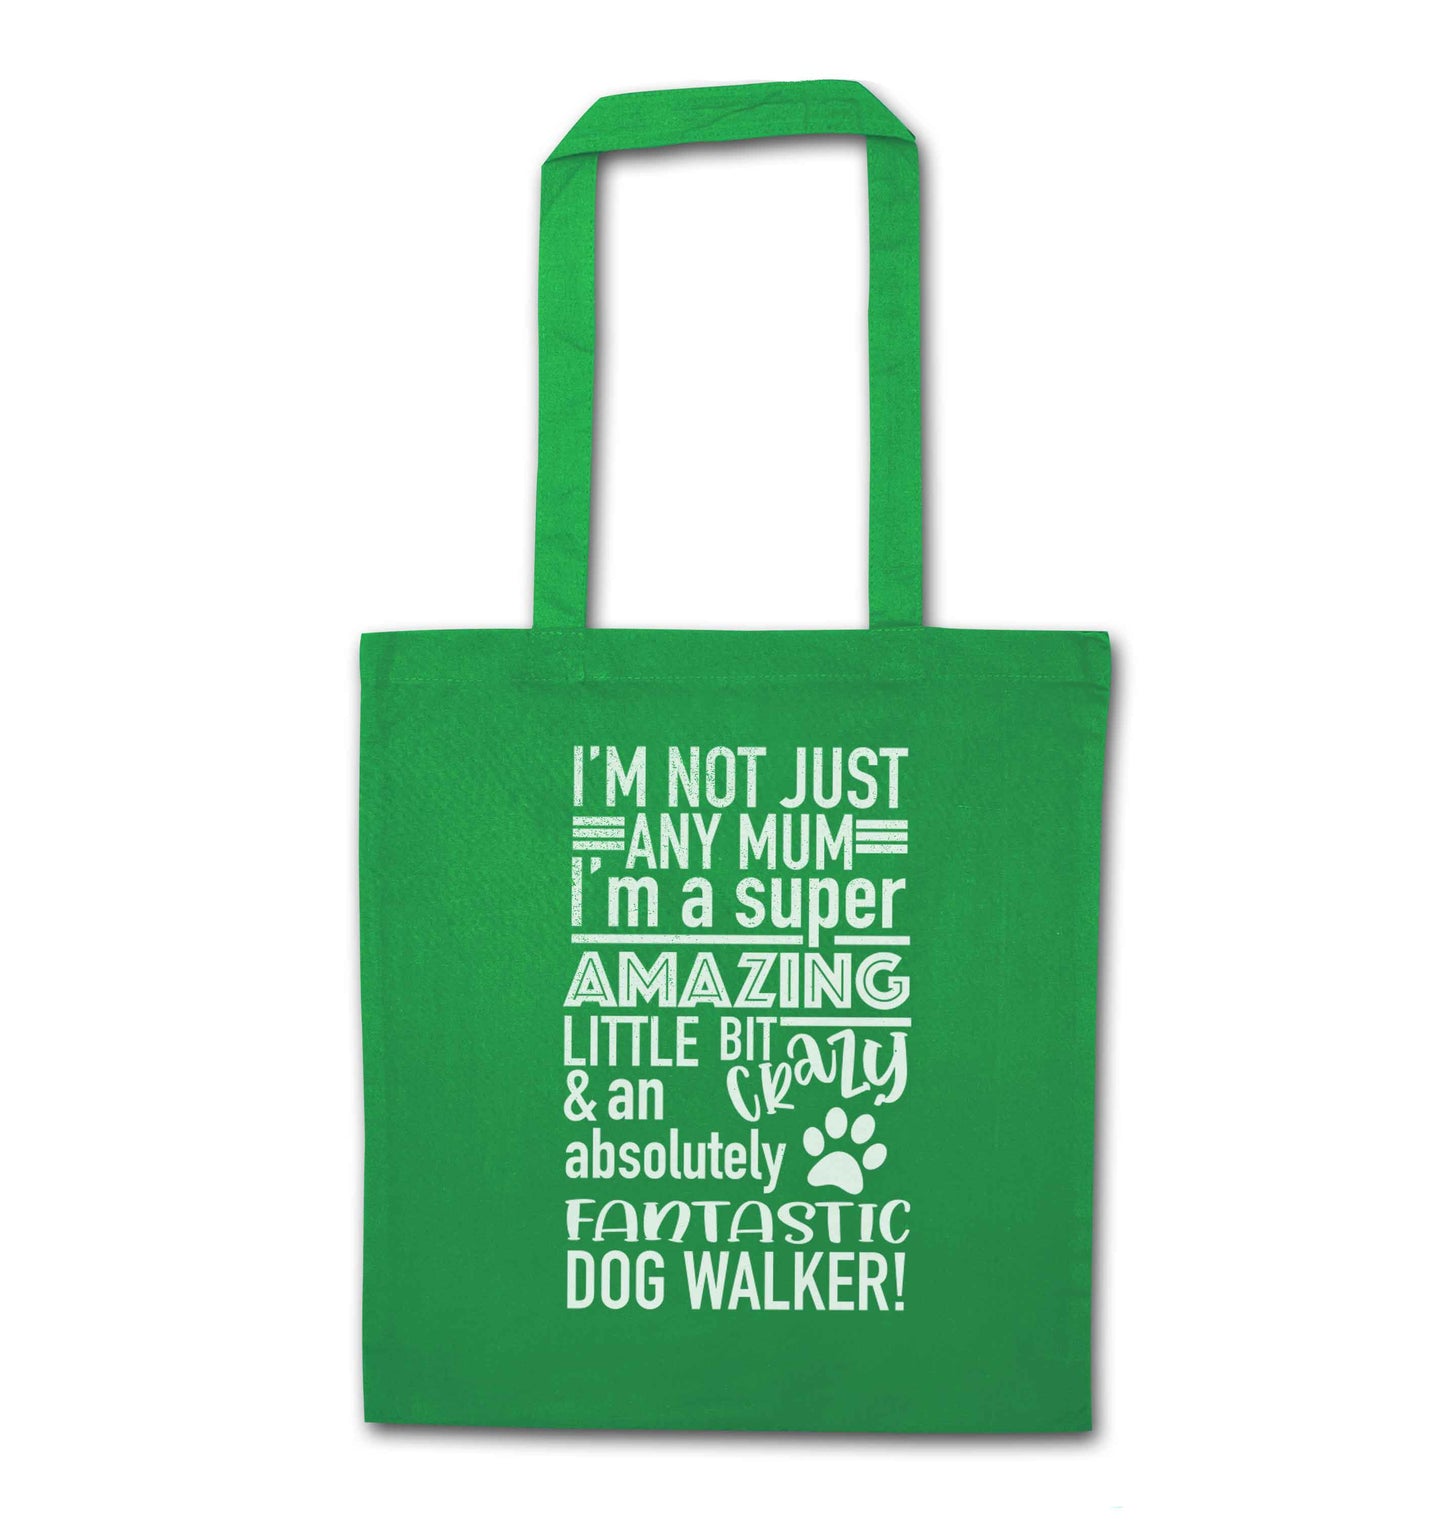 I'm not just any mum I'm a super amazing little bit crazy and an absolutely fantastic dog walker! green tote bag